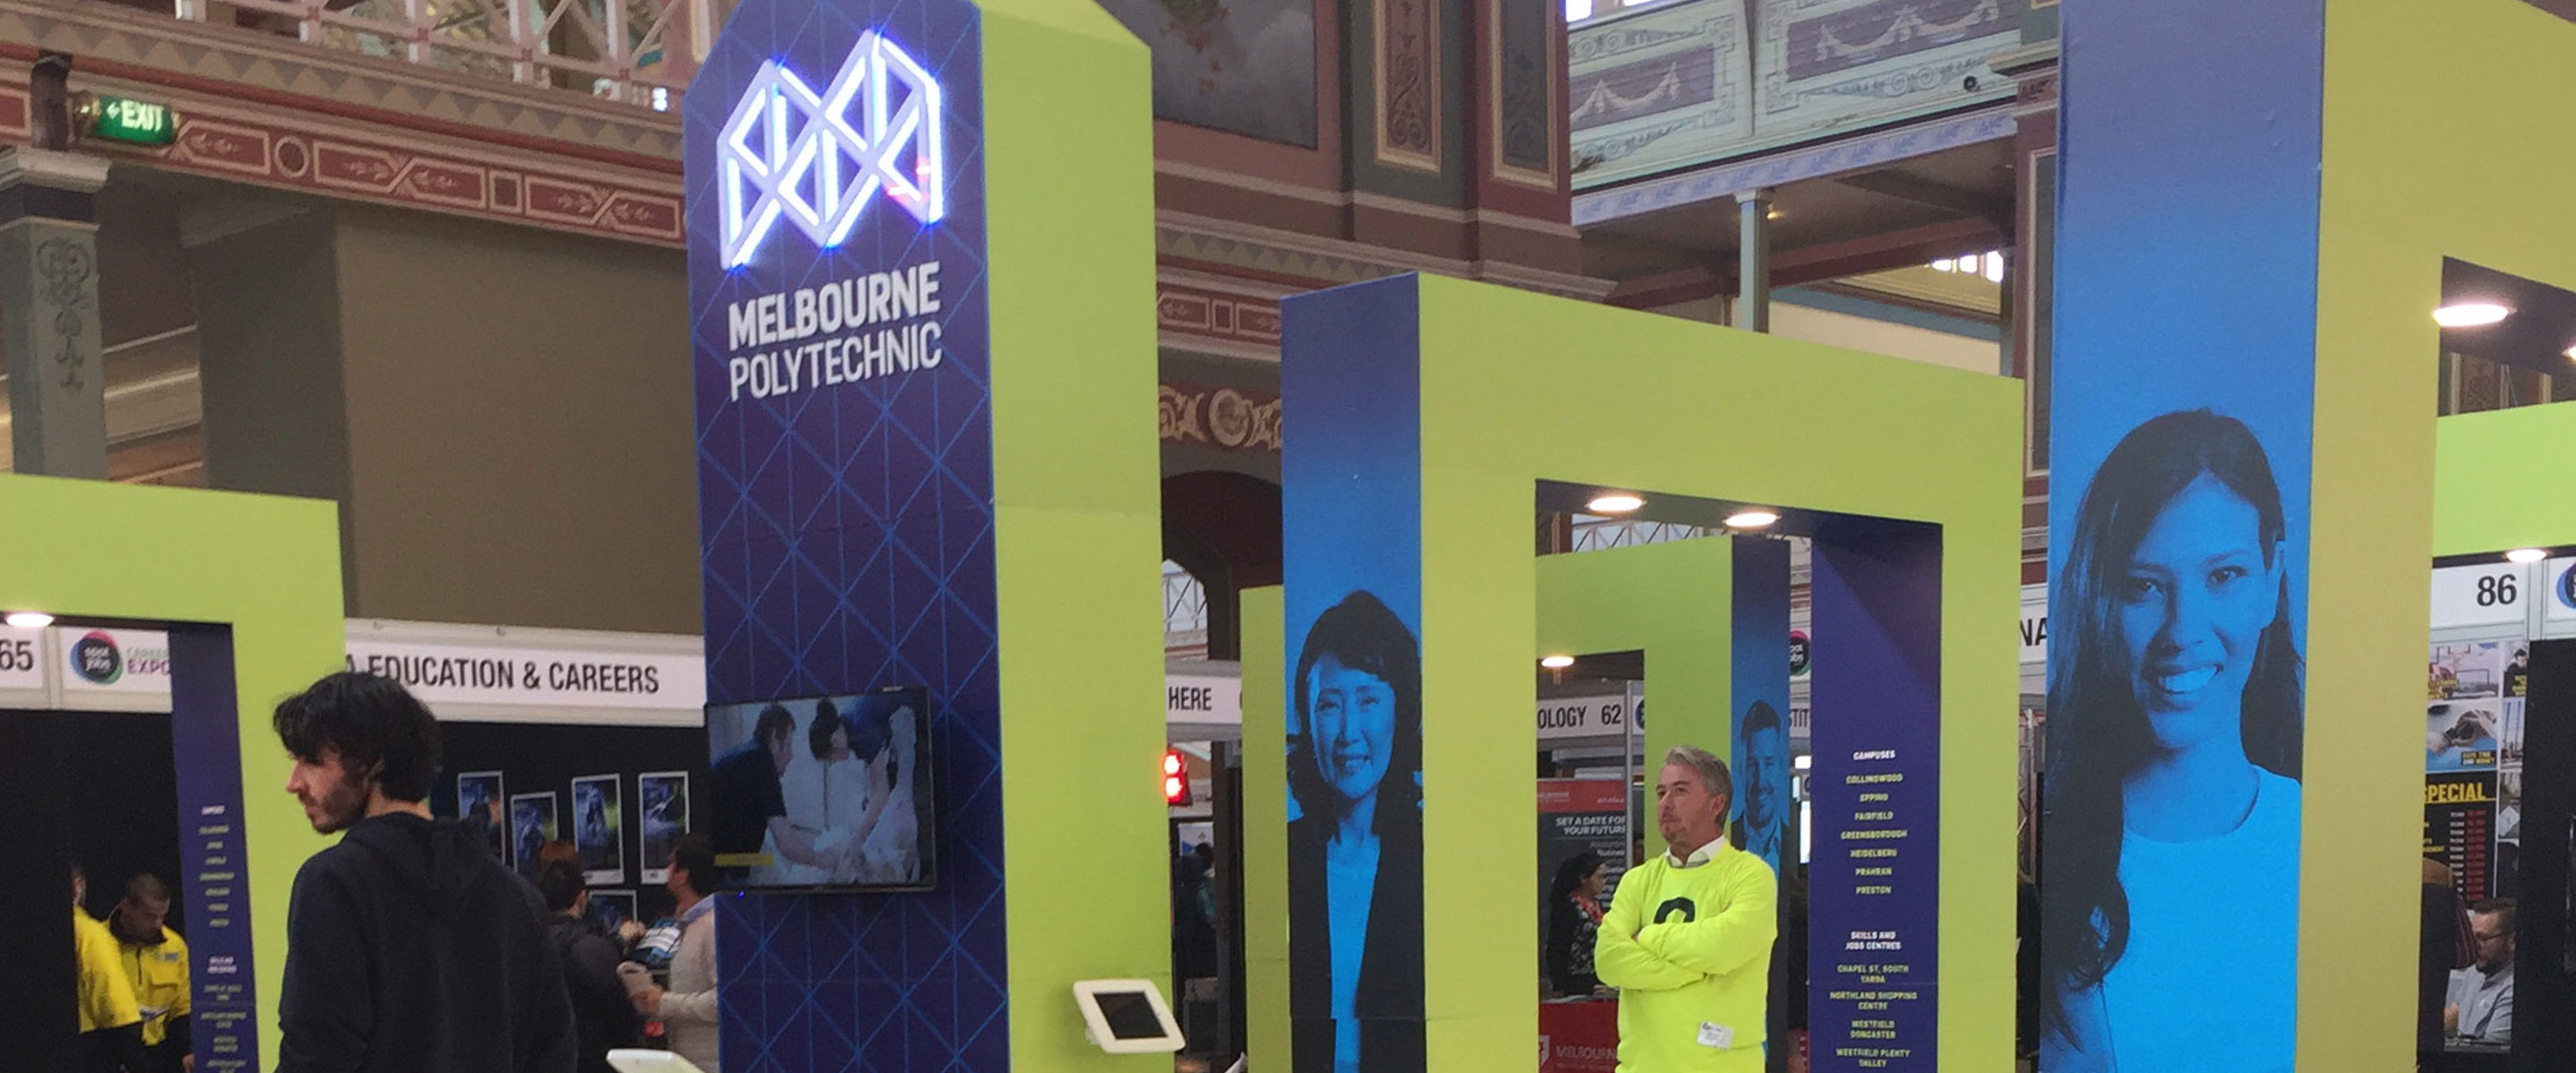 Melbourne Polytechnic Stand at Student Expo at Royal Exhibition Building